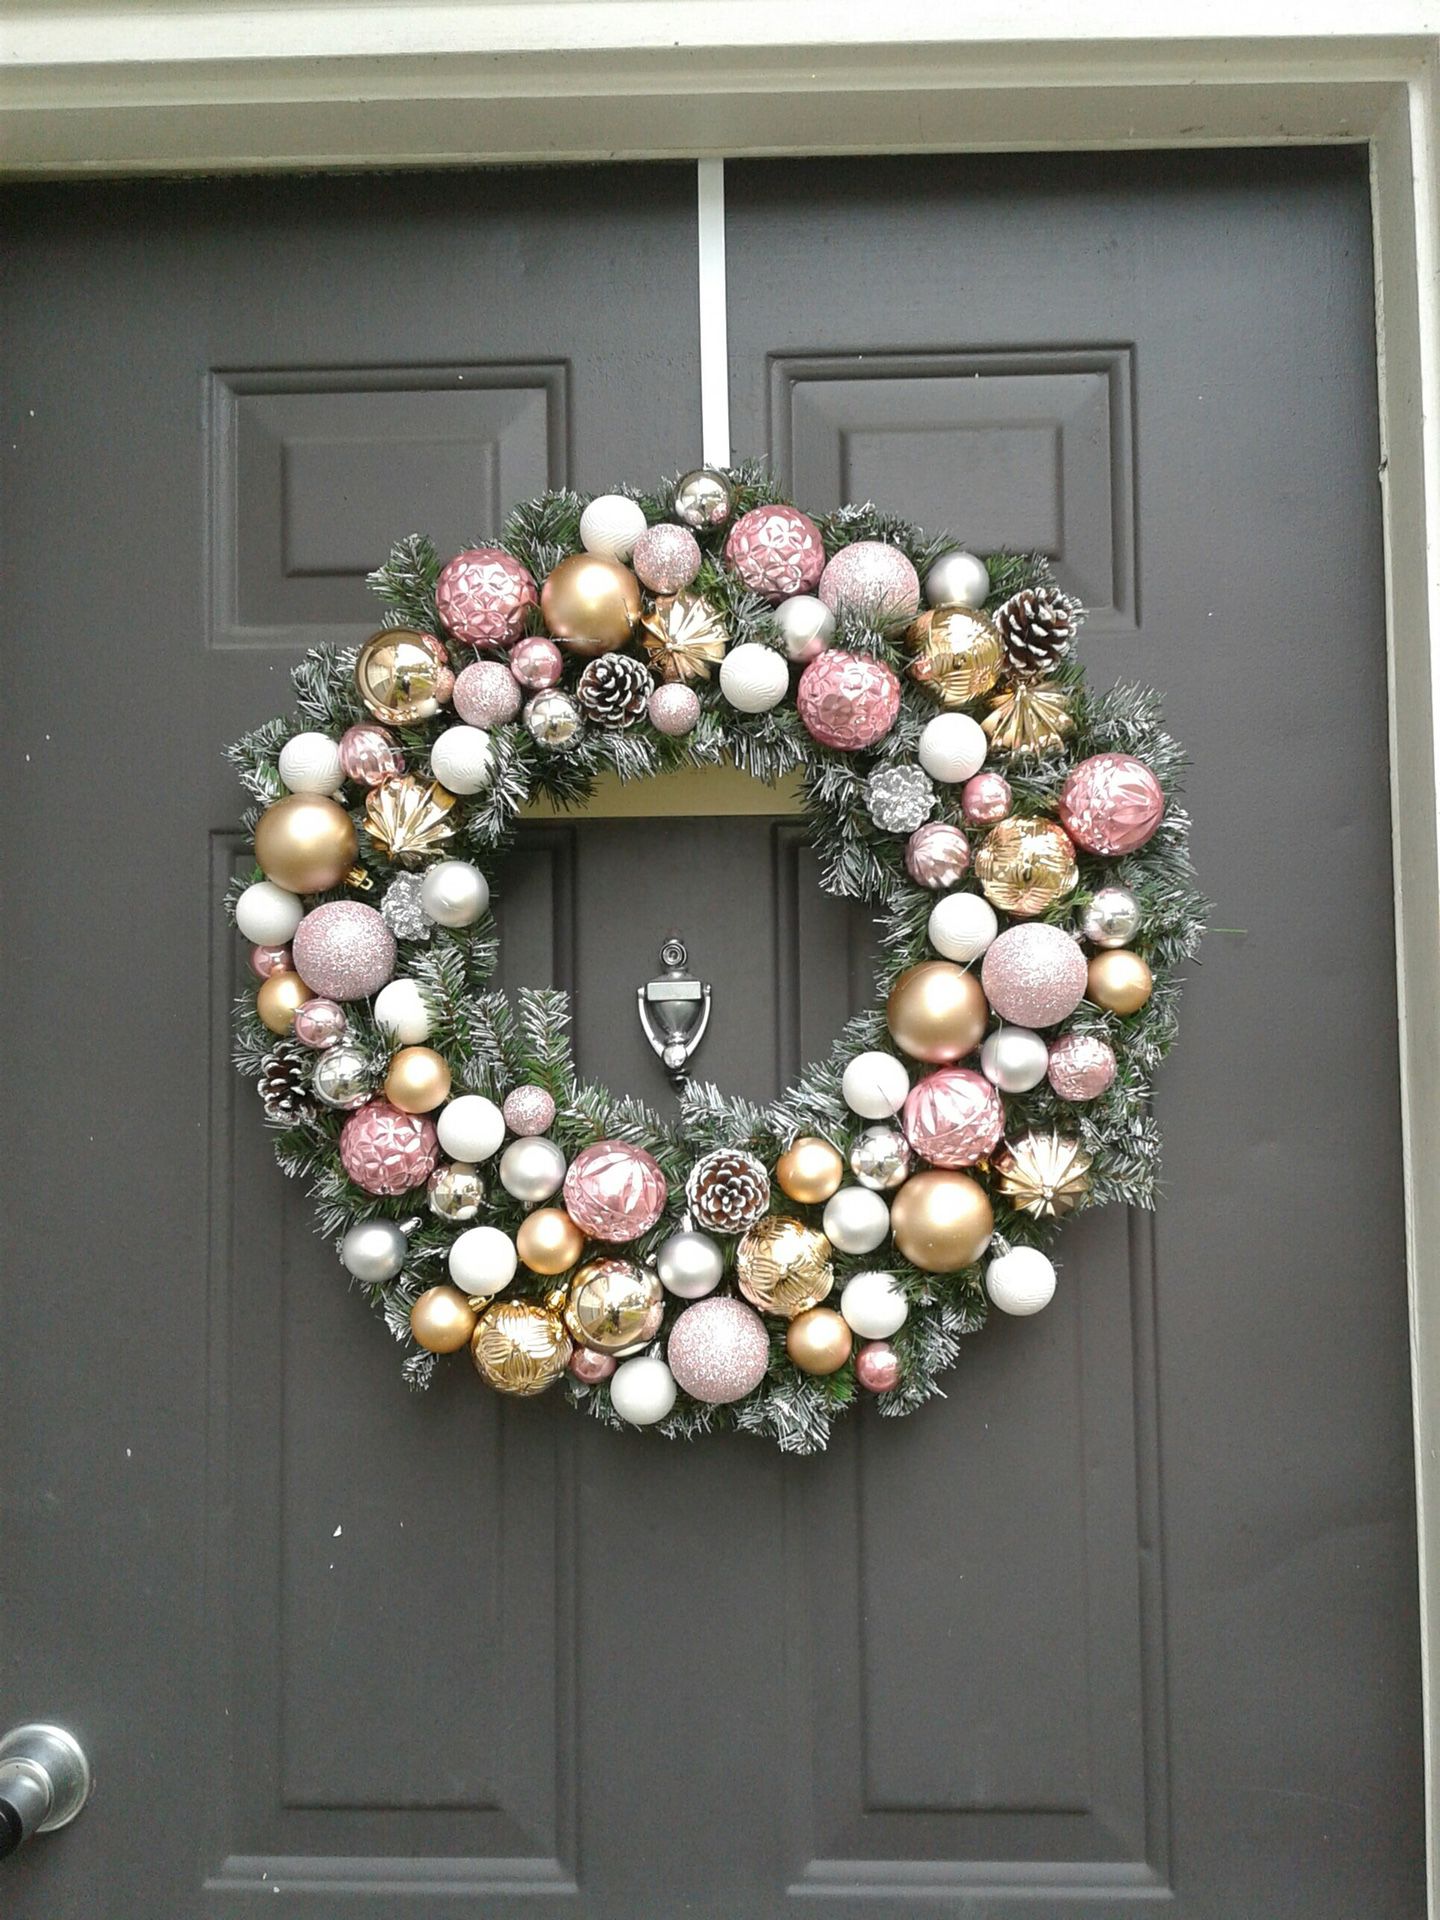 Wreath with Ornaments